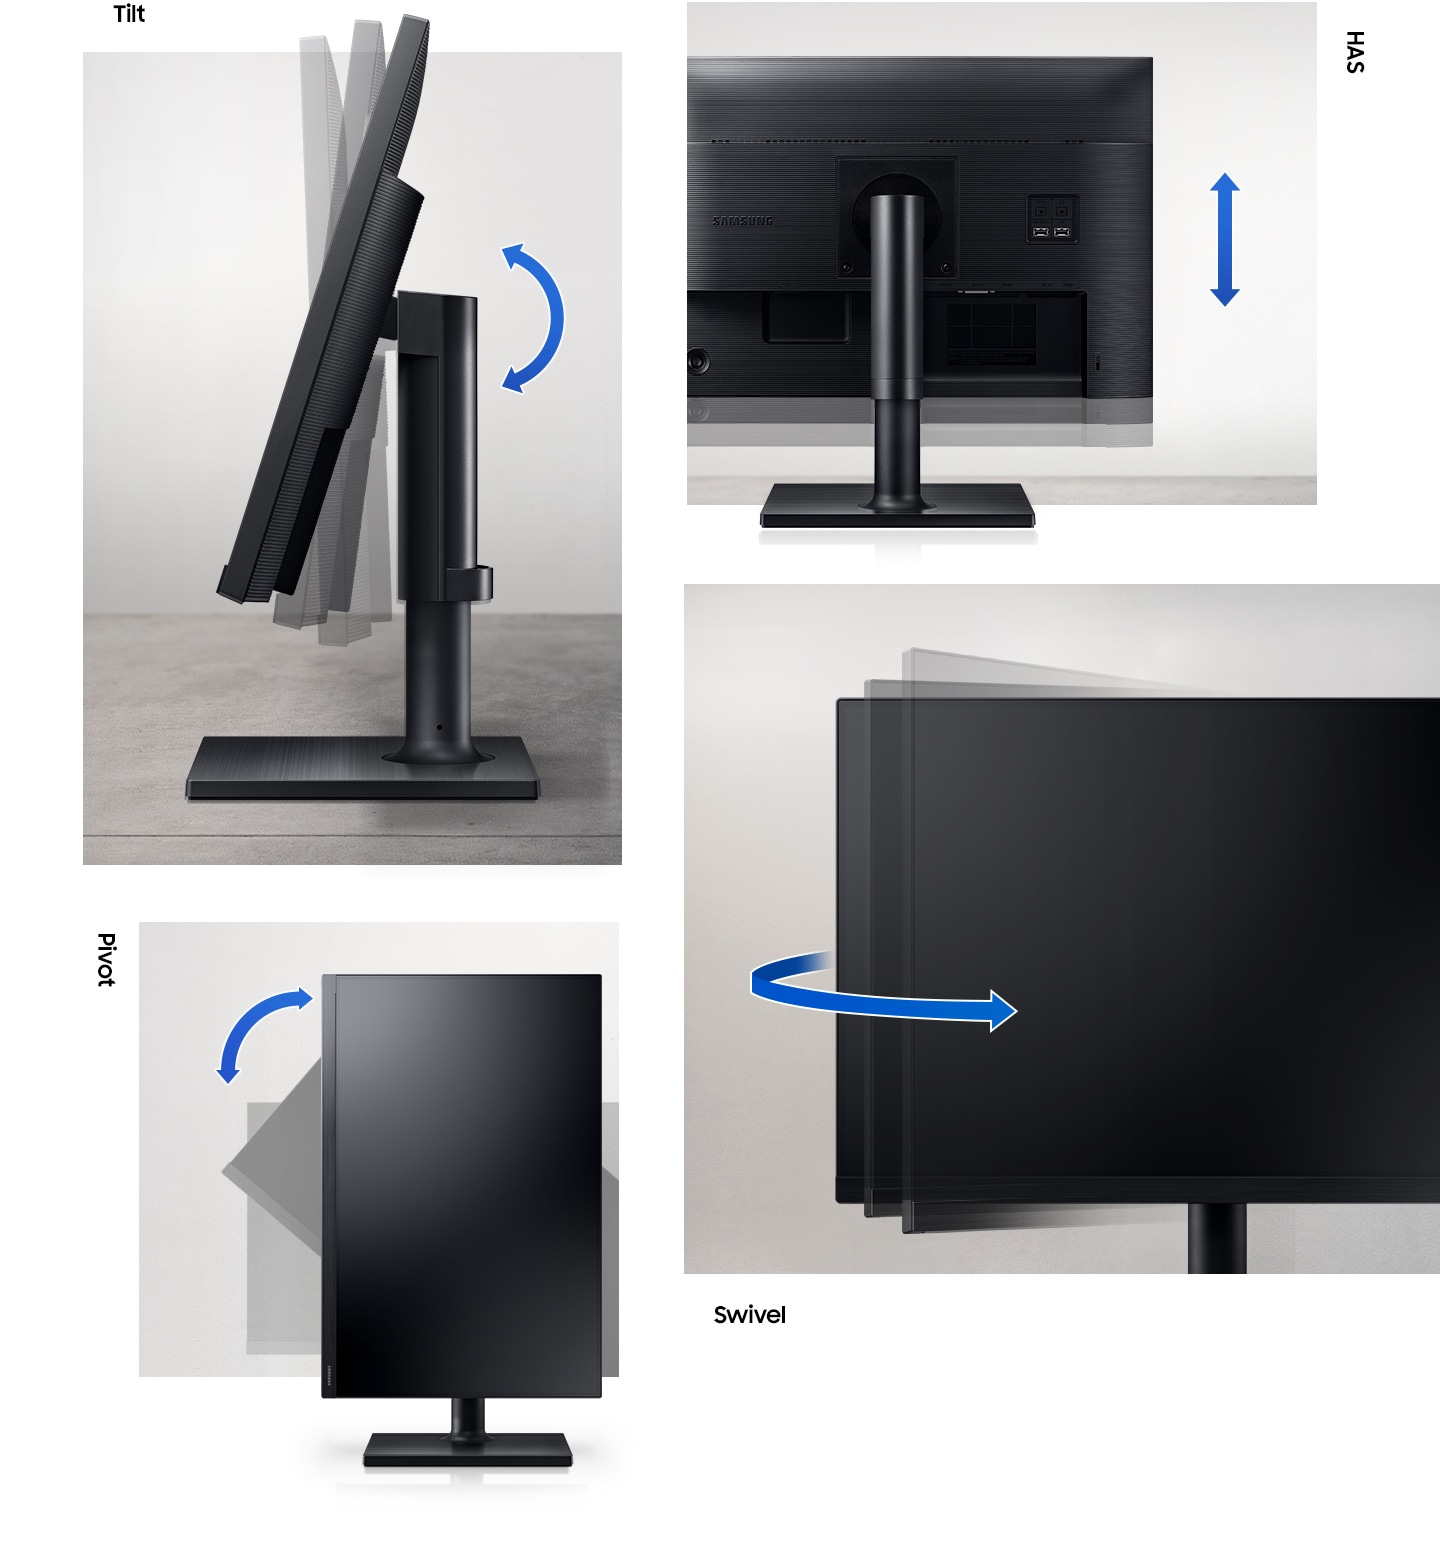 Tilt, HAS, Pivot and swivel functions in operation on T45F 24W monitor